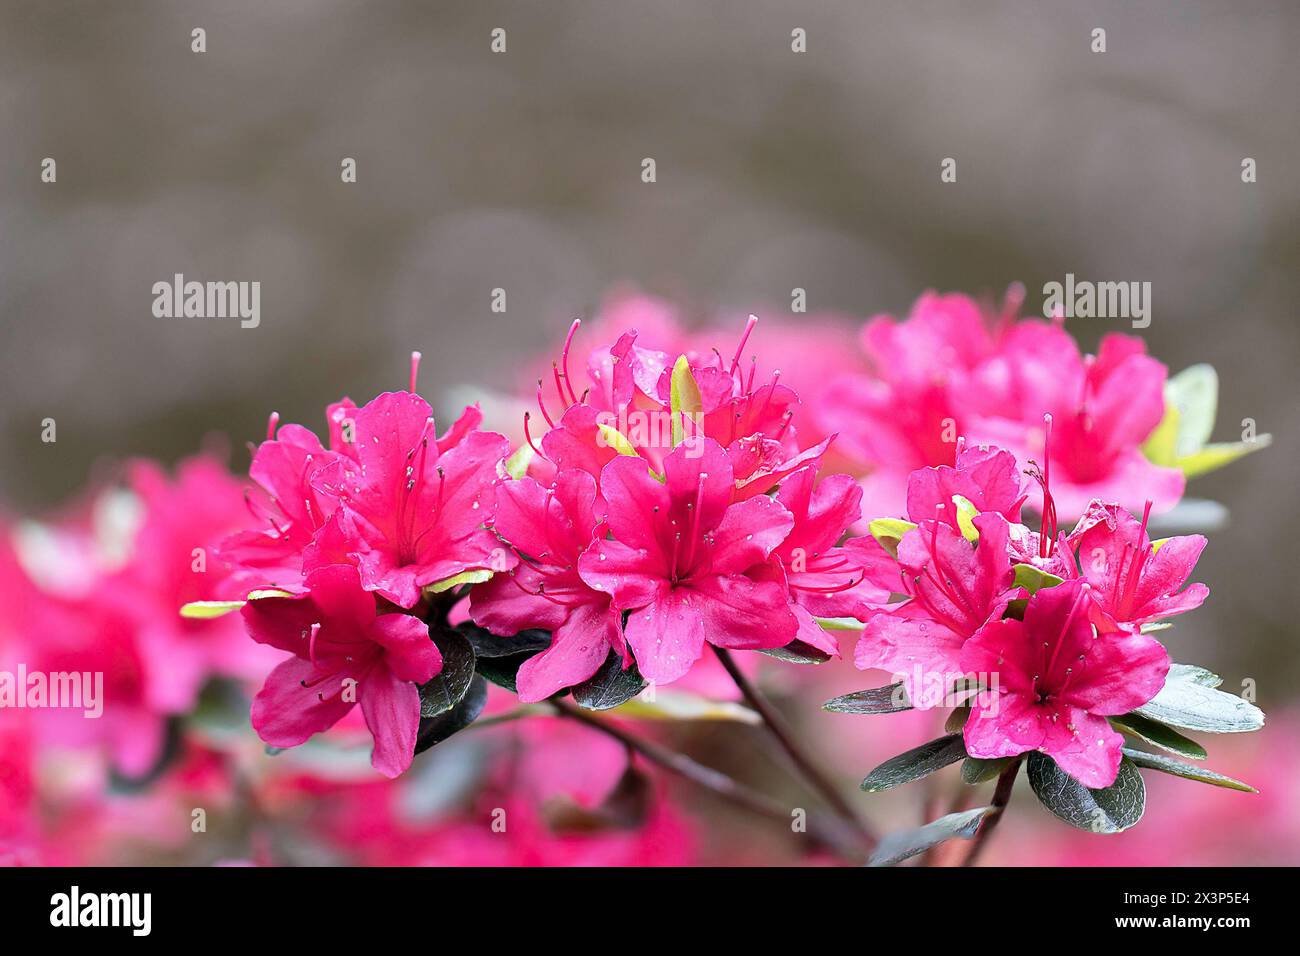 pink rhododendron flowers detail (Rhododendron molle japonica), focus stack Stock Photo